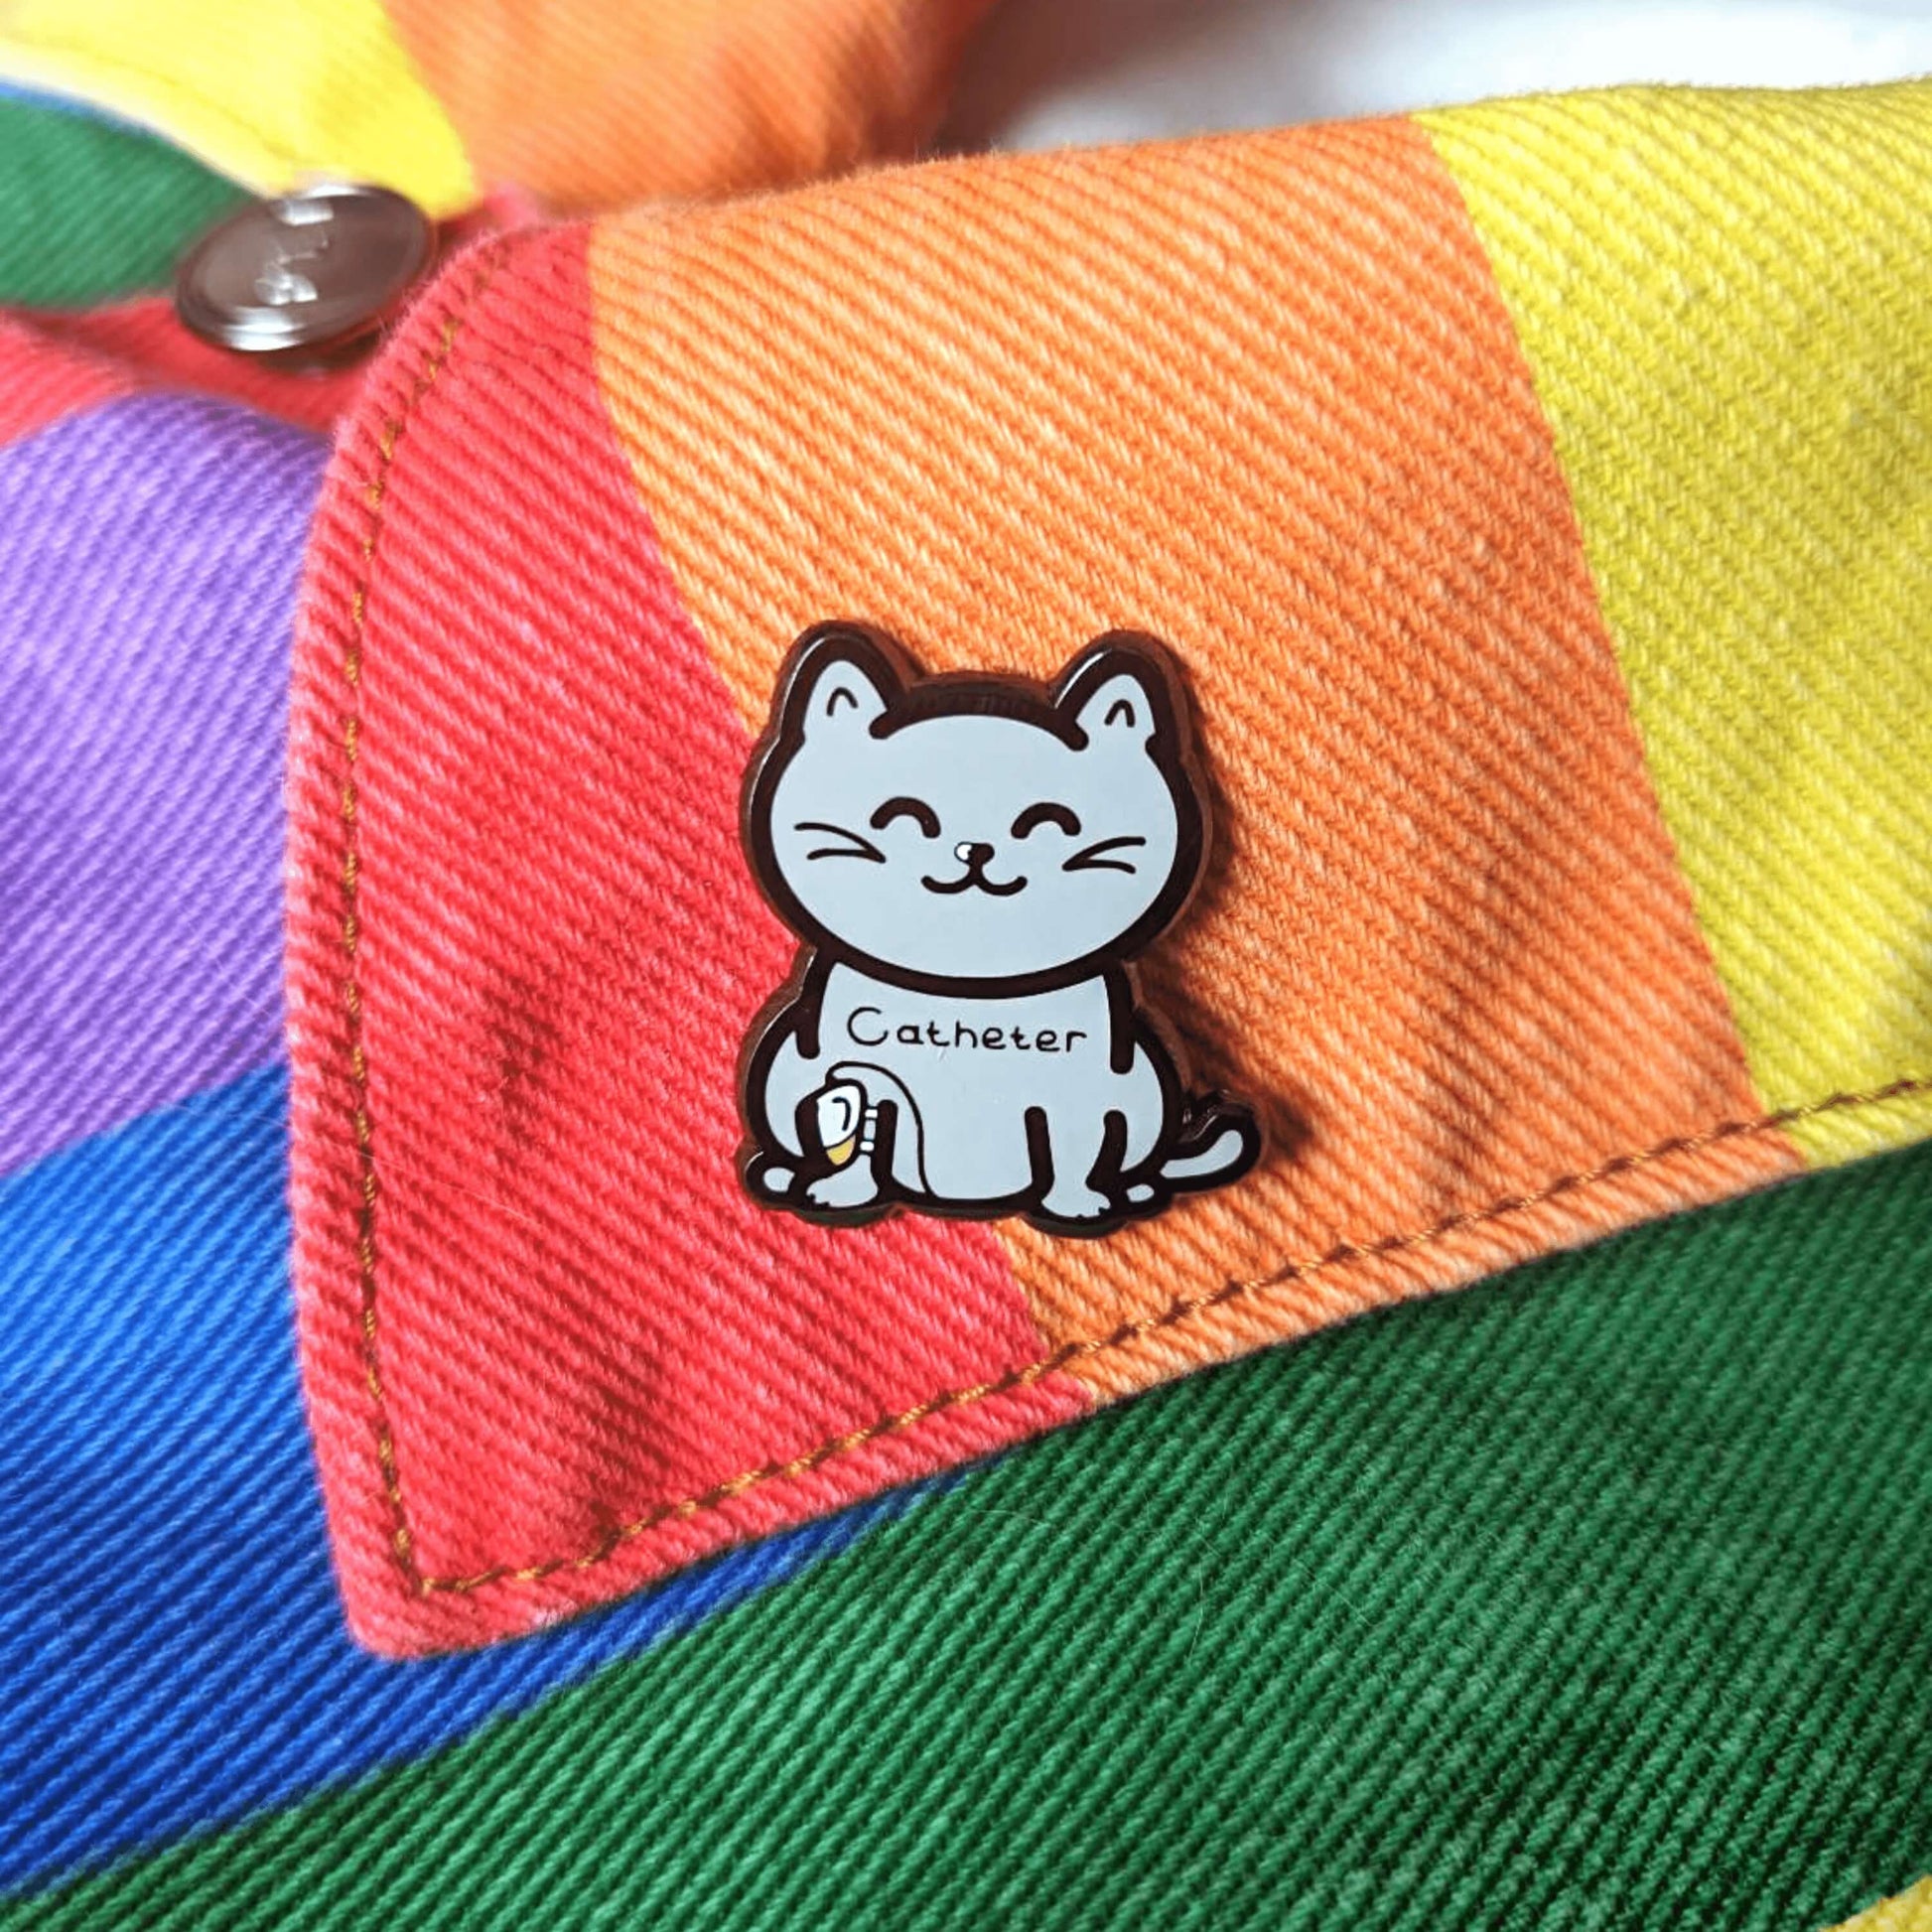 The Catheter Enamel Pin - Catheter on a rainbow denim jacket collar. The pin is a grey smiling cat sat down with a urine drainage Urostomy pouch strapped to its right leg and text across its chest reading 'catheter'. The pin is designed to raise awareness for bladder problems such as UTIs and other chronic illnesses.